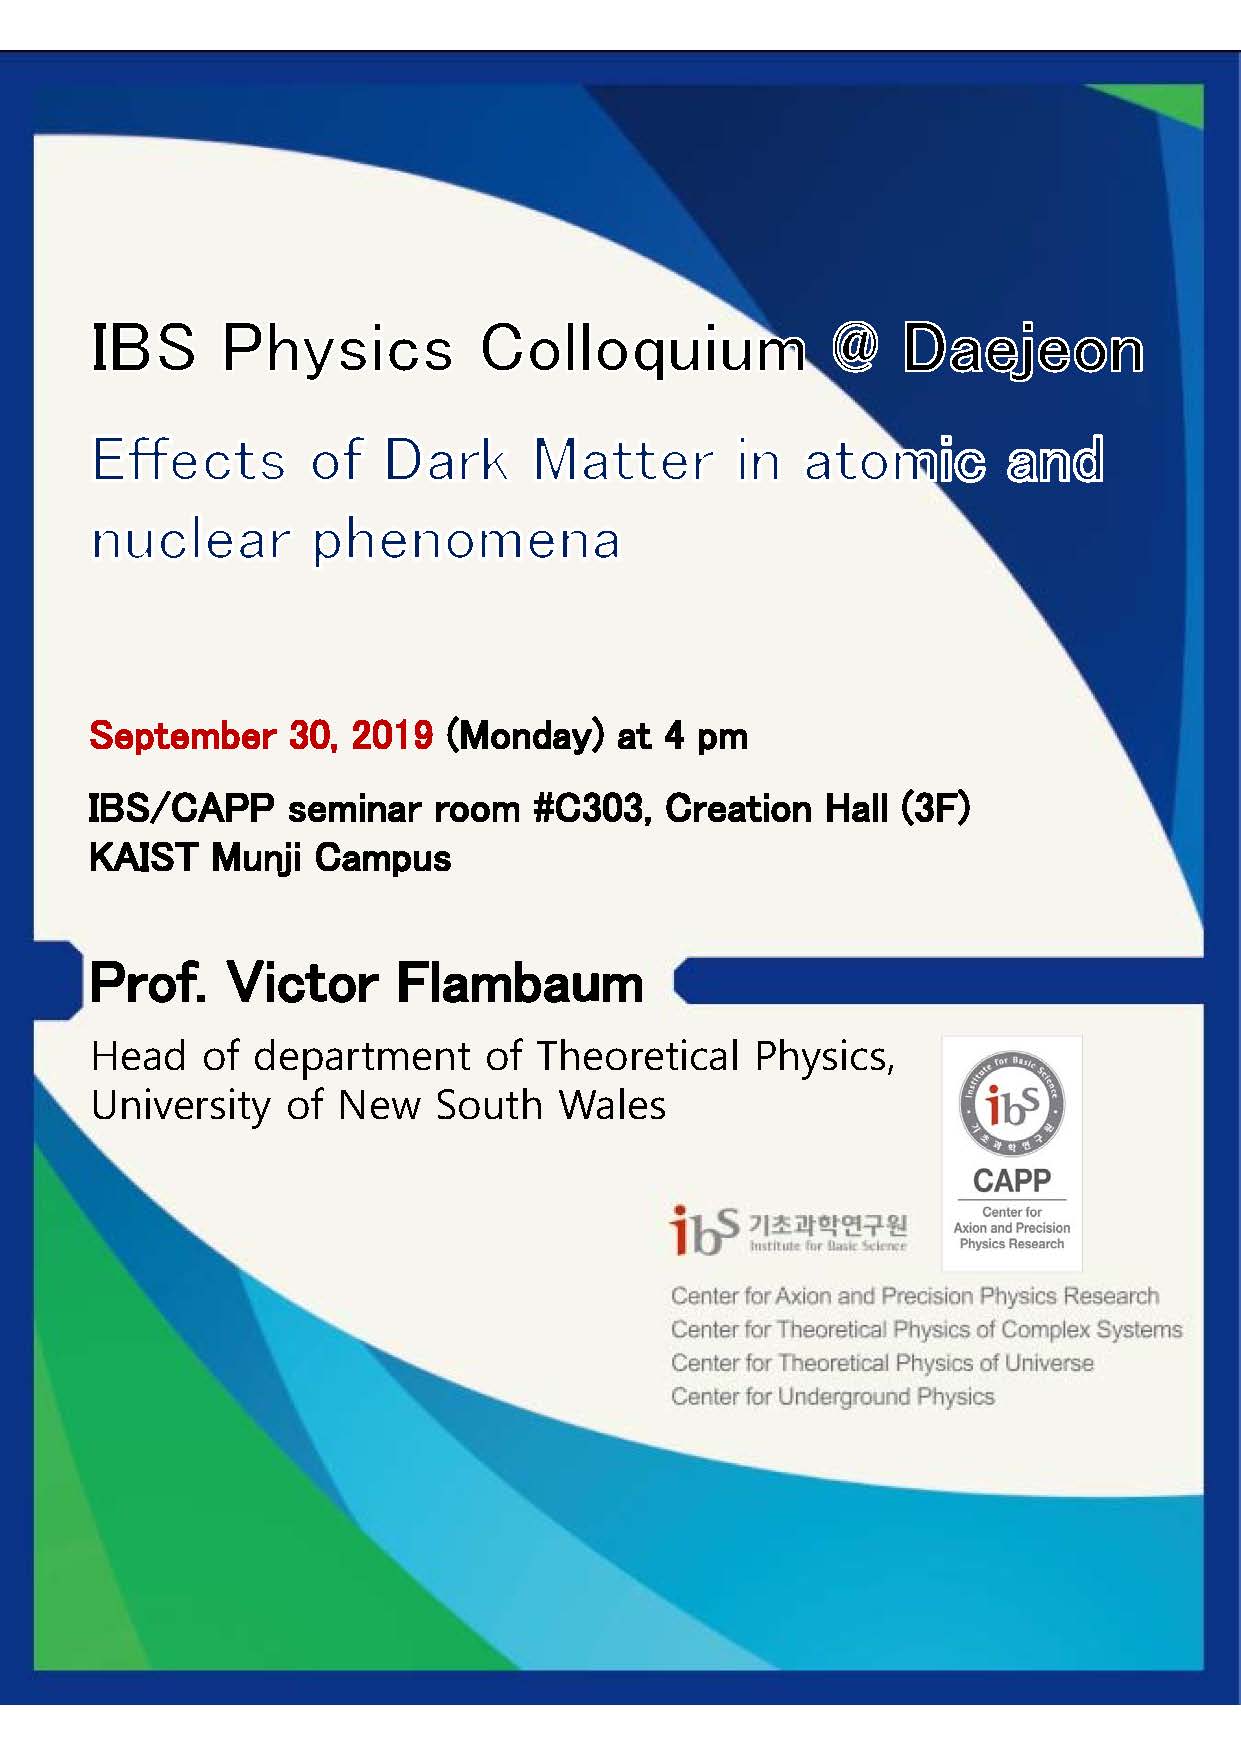 [IBS 콜로퀴움] Effects of Dark Matter in atomic and nuclear phenomena by Prof. Victor Flambaum 사진